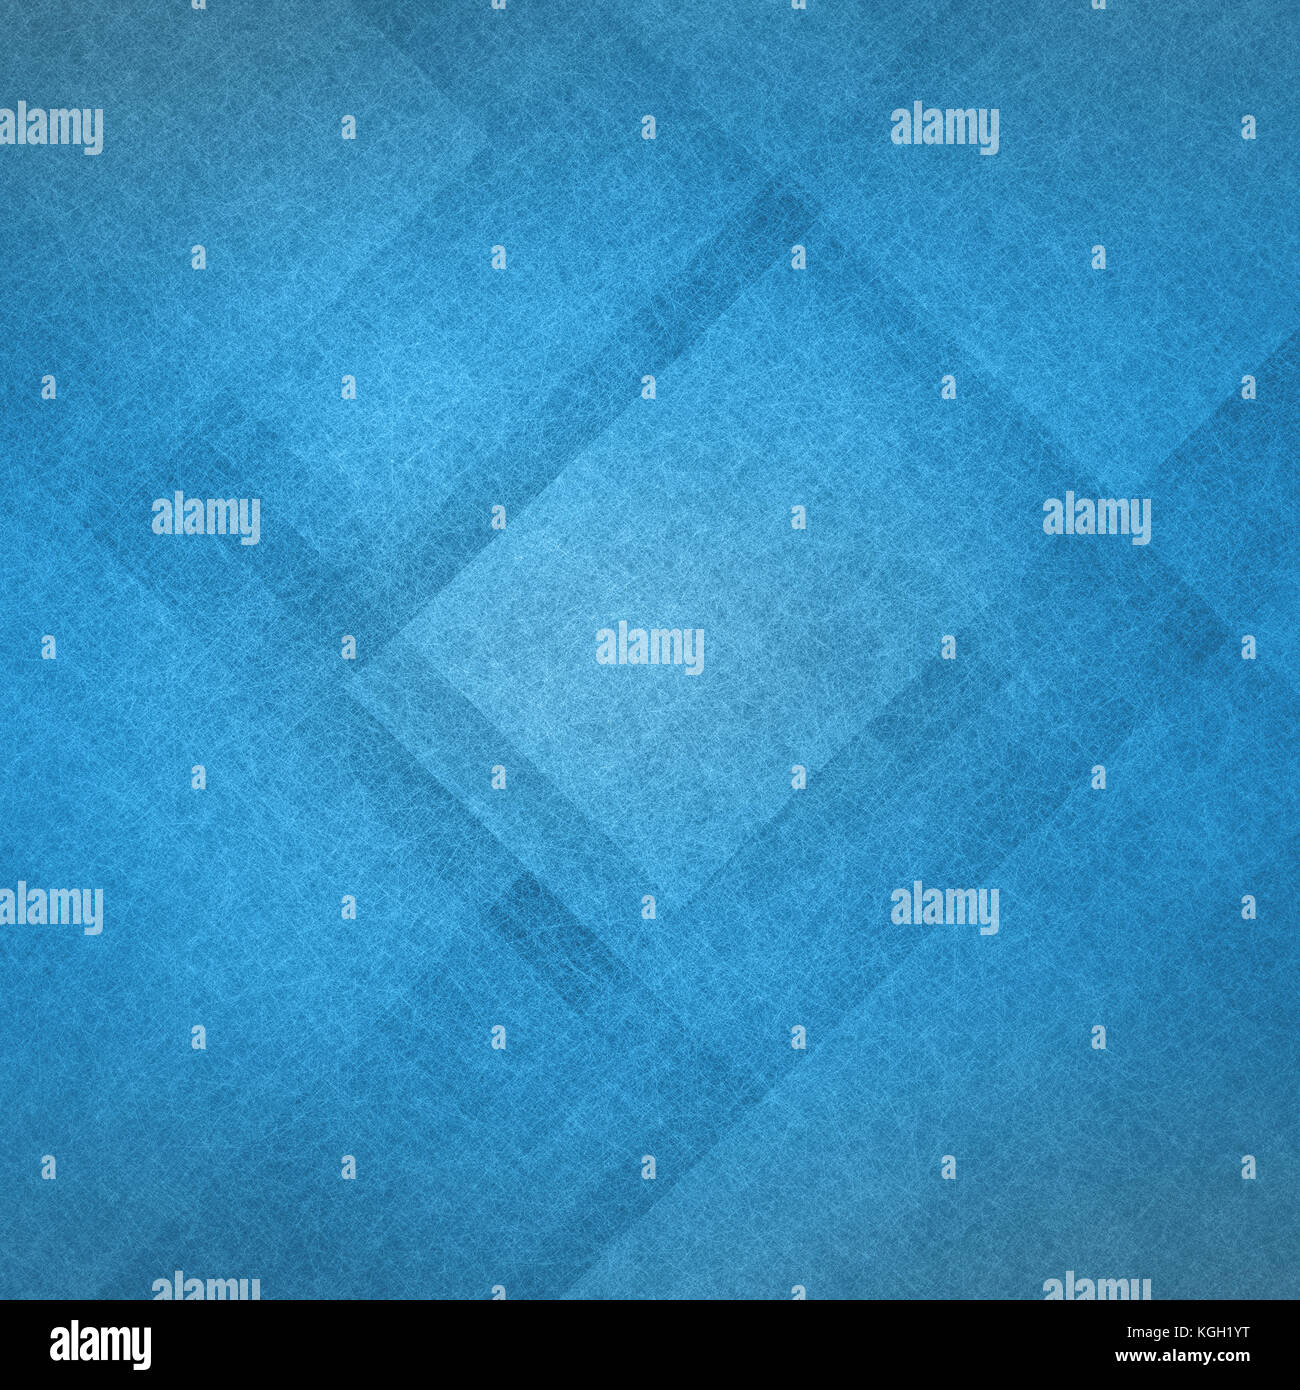 abstract background with angles and triangles, blocks and diamond shapes in random layered pattern, cool blue background image for graphic art project Stock Photo